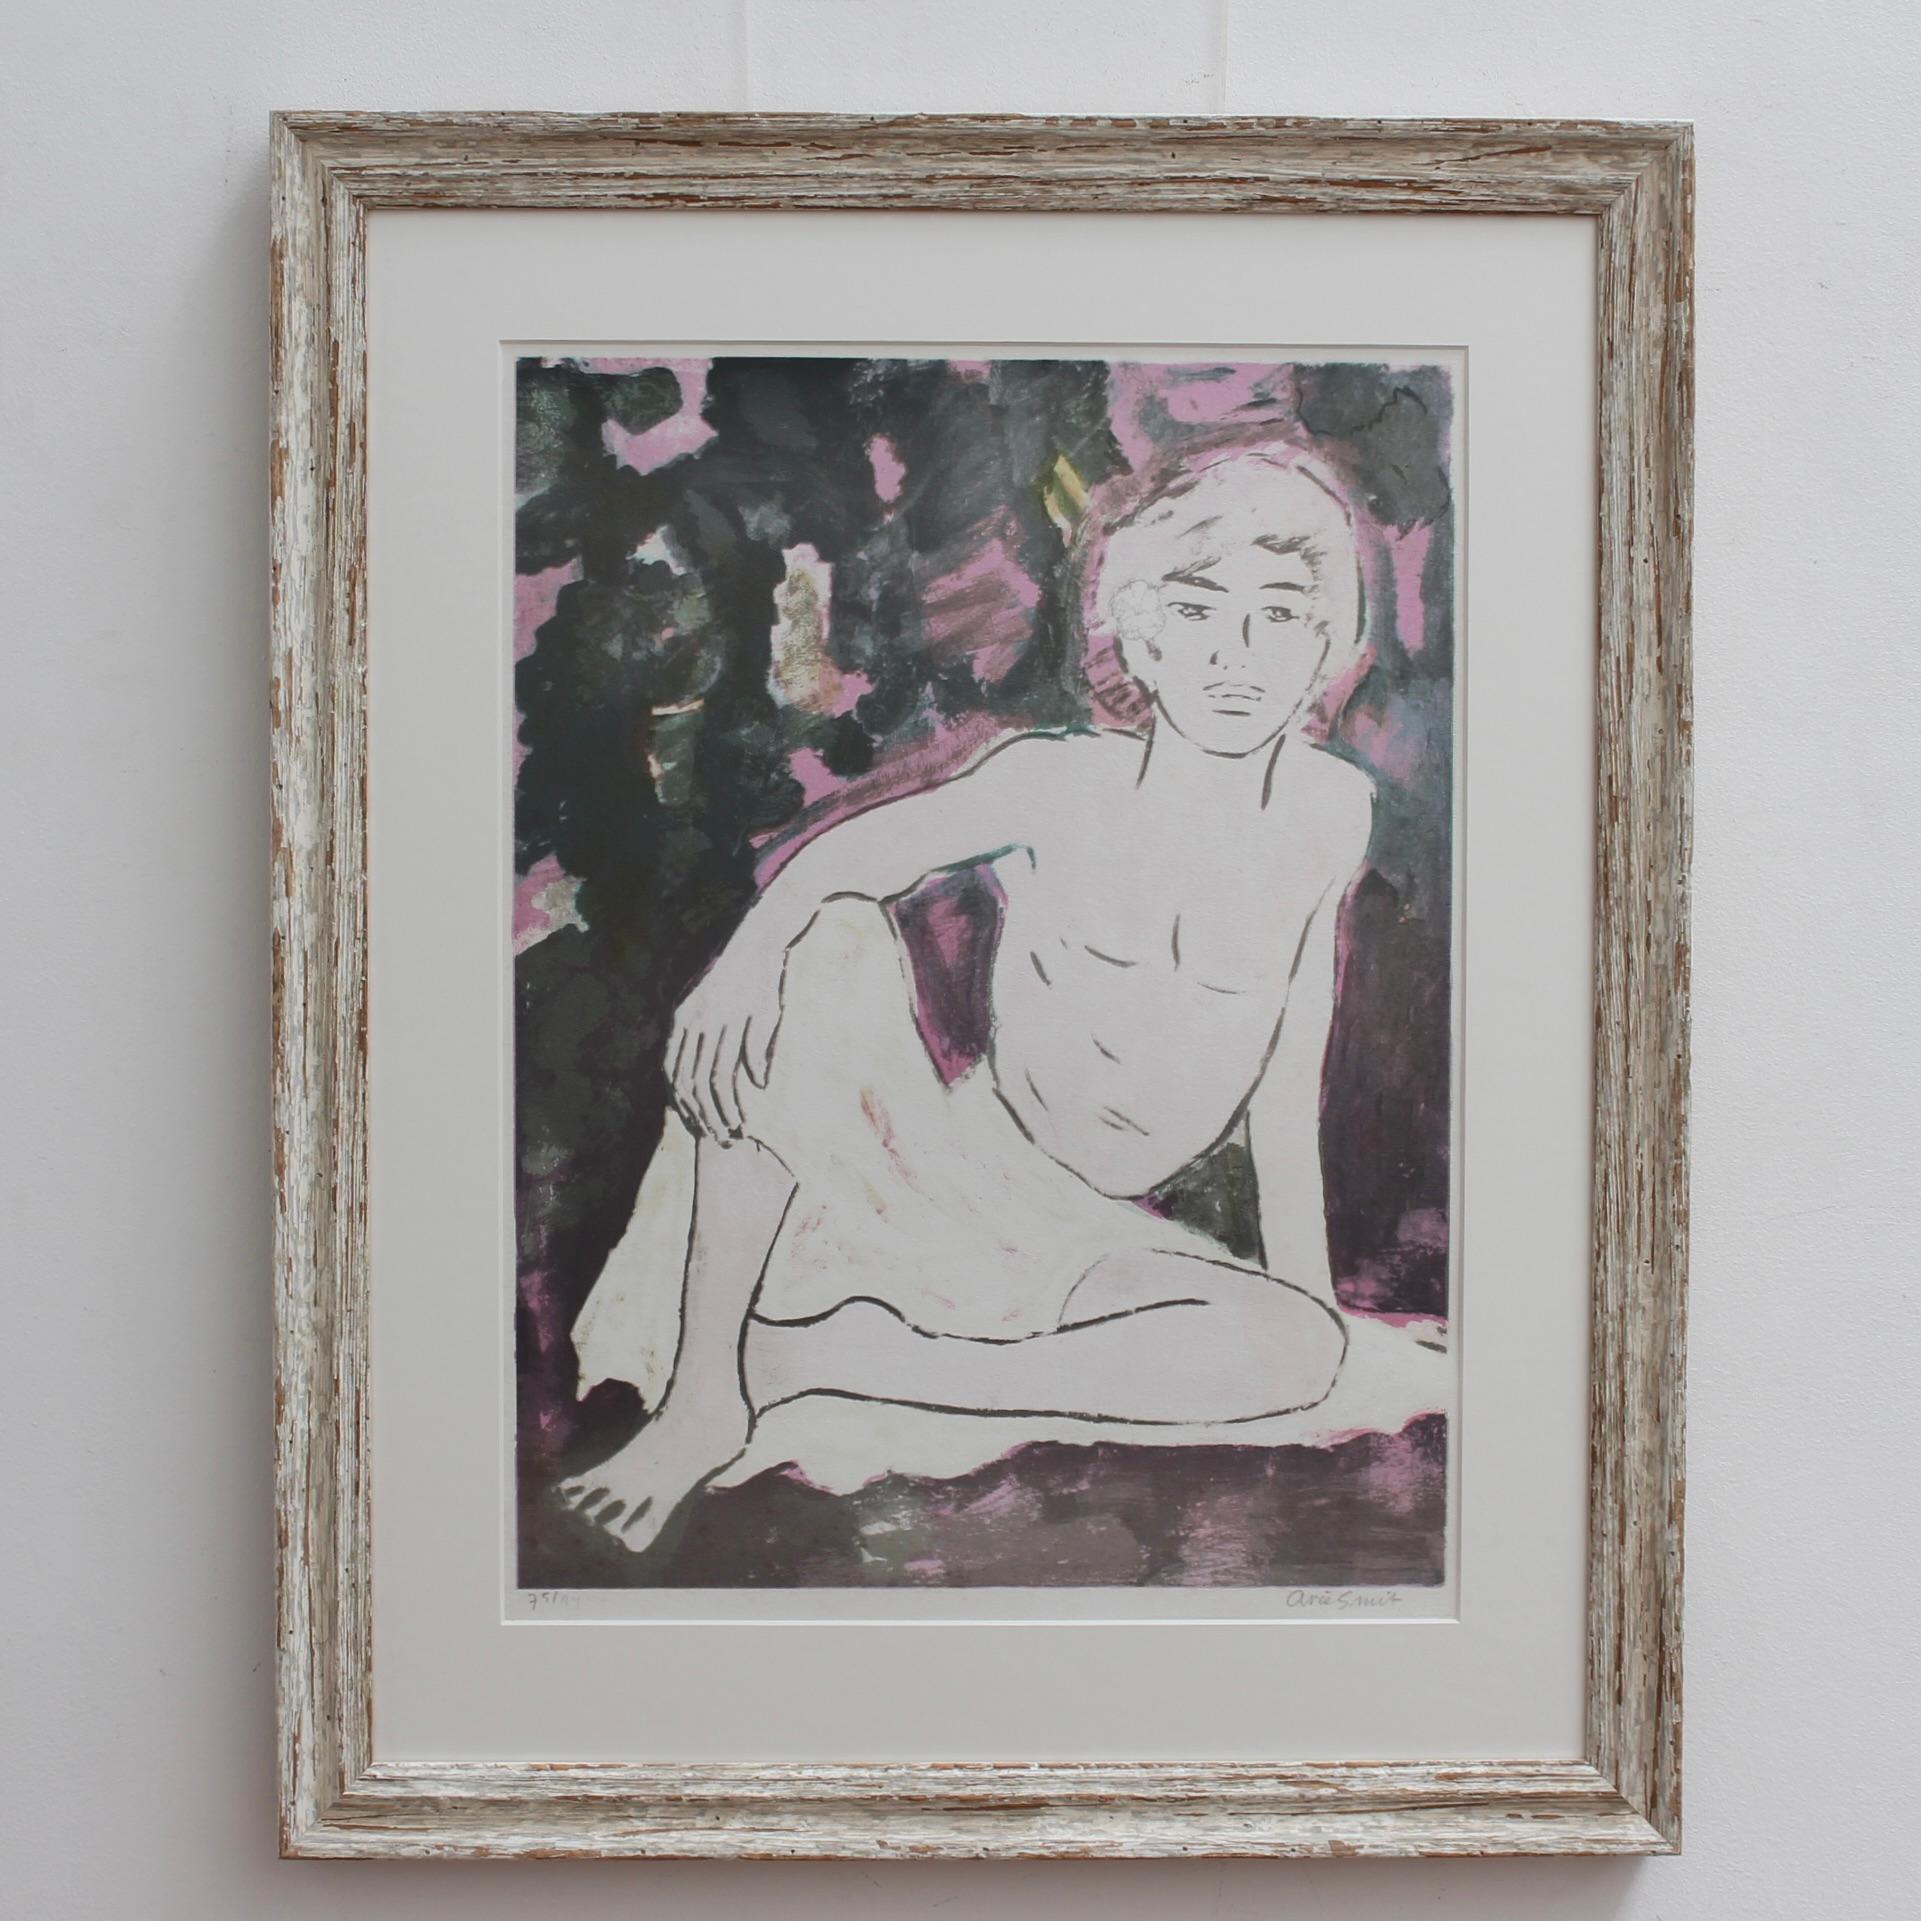 'Balinese Boy', original signed lithograph, by Arie Smit (circa 1980s). Young Balinese men feature heavily in the oeuvre of the artist. In this case, it appears the artist sketched the young man simply, then chose to add colour only to the